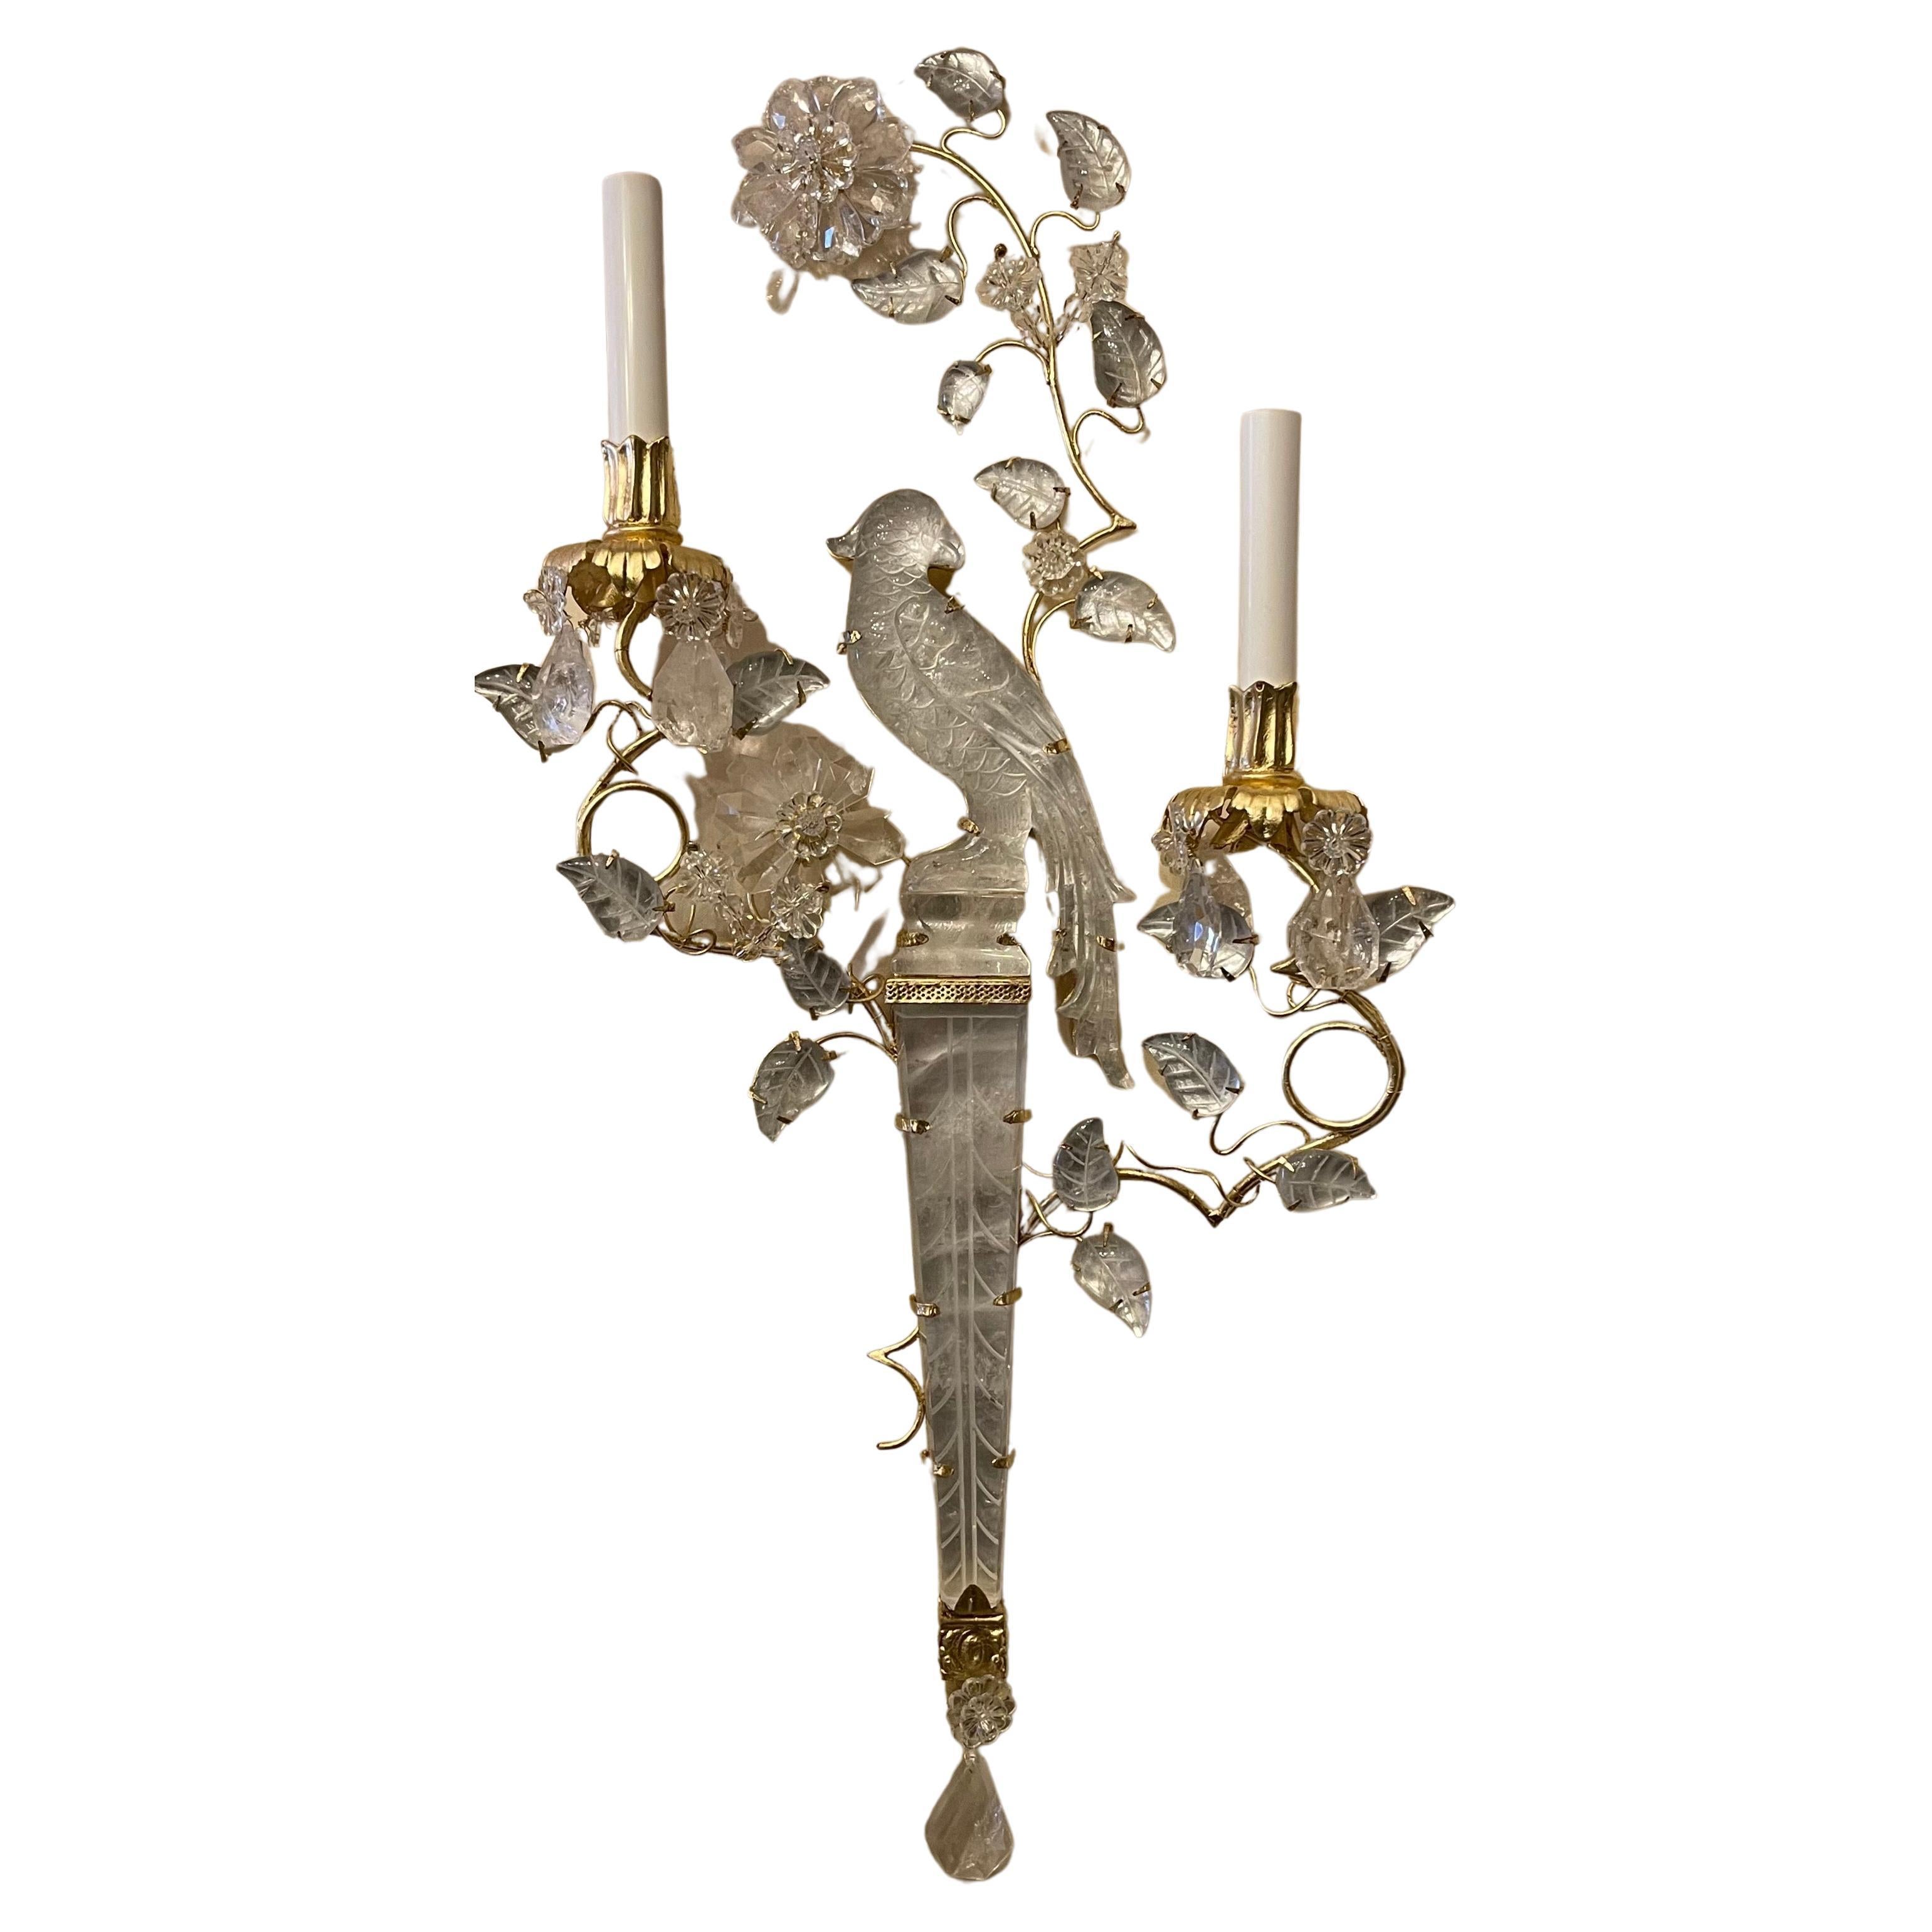 A Wonderful Pair Of Large Bagues Style Rock Crystal Two-Arm Candelabra Socket Gold Gilt Bird / Parrot Resting On Leaf Center Shaft Sconces
Completely Rewired With New Sockets